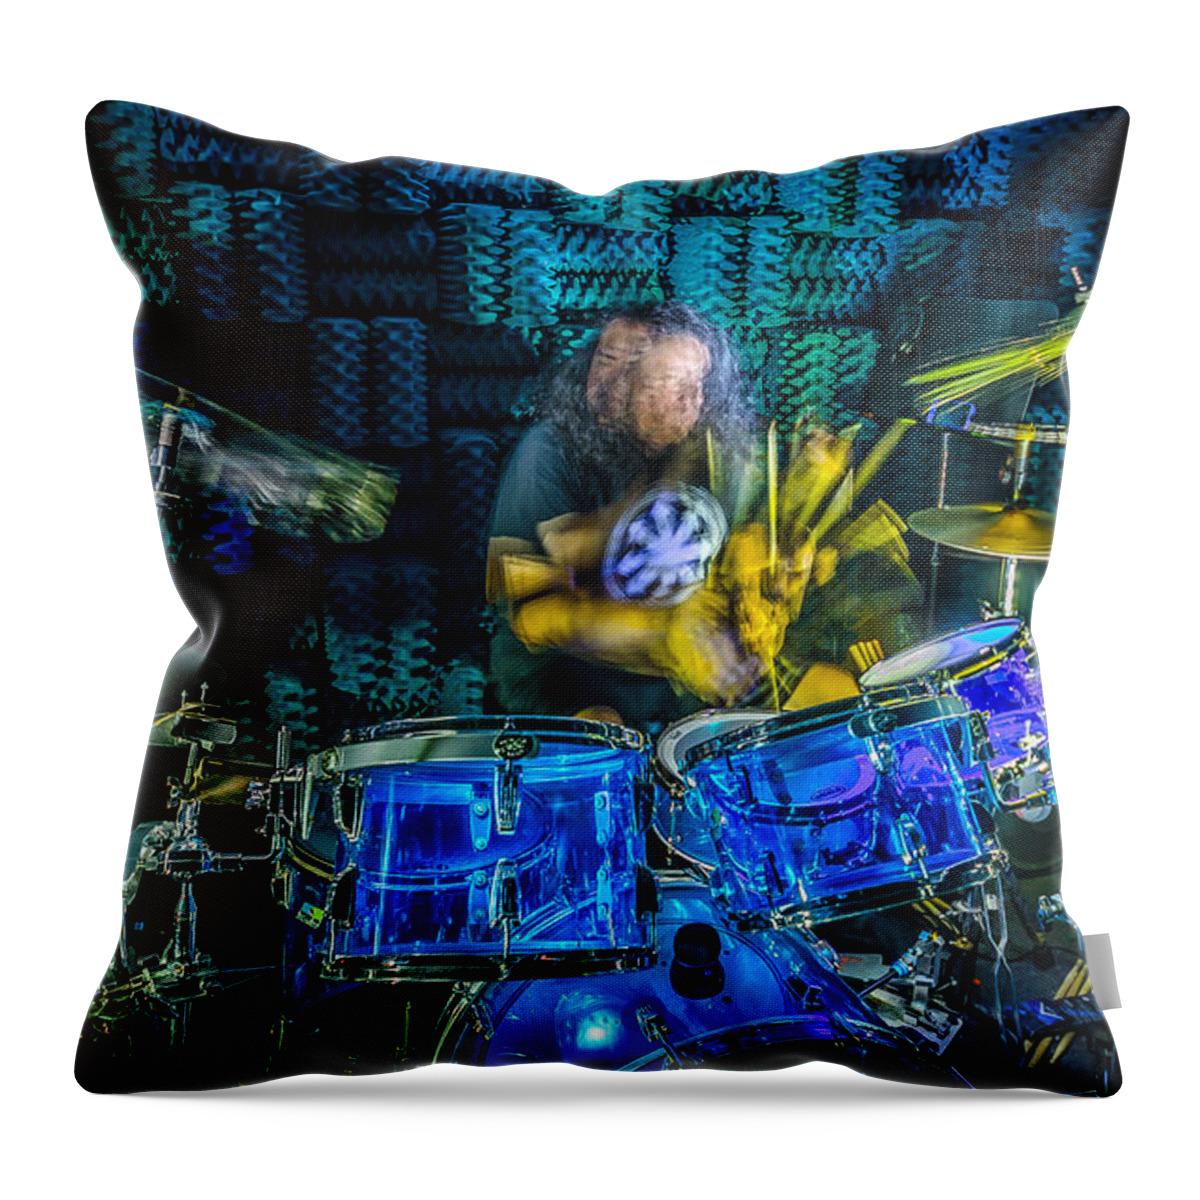 Drums Throw Pillow featuring the photograph The Drummer by David Morefield